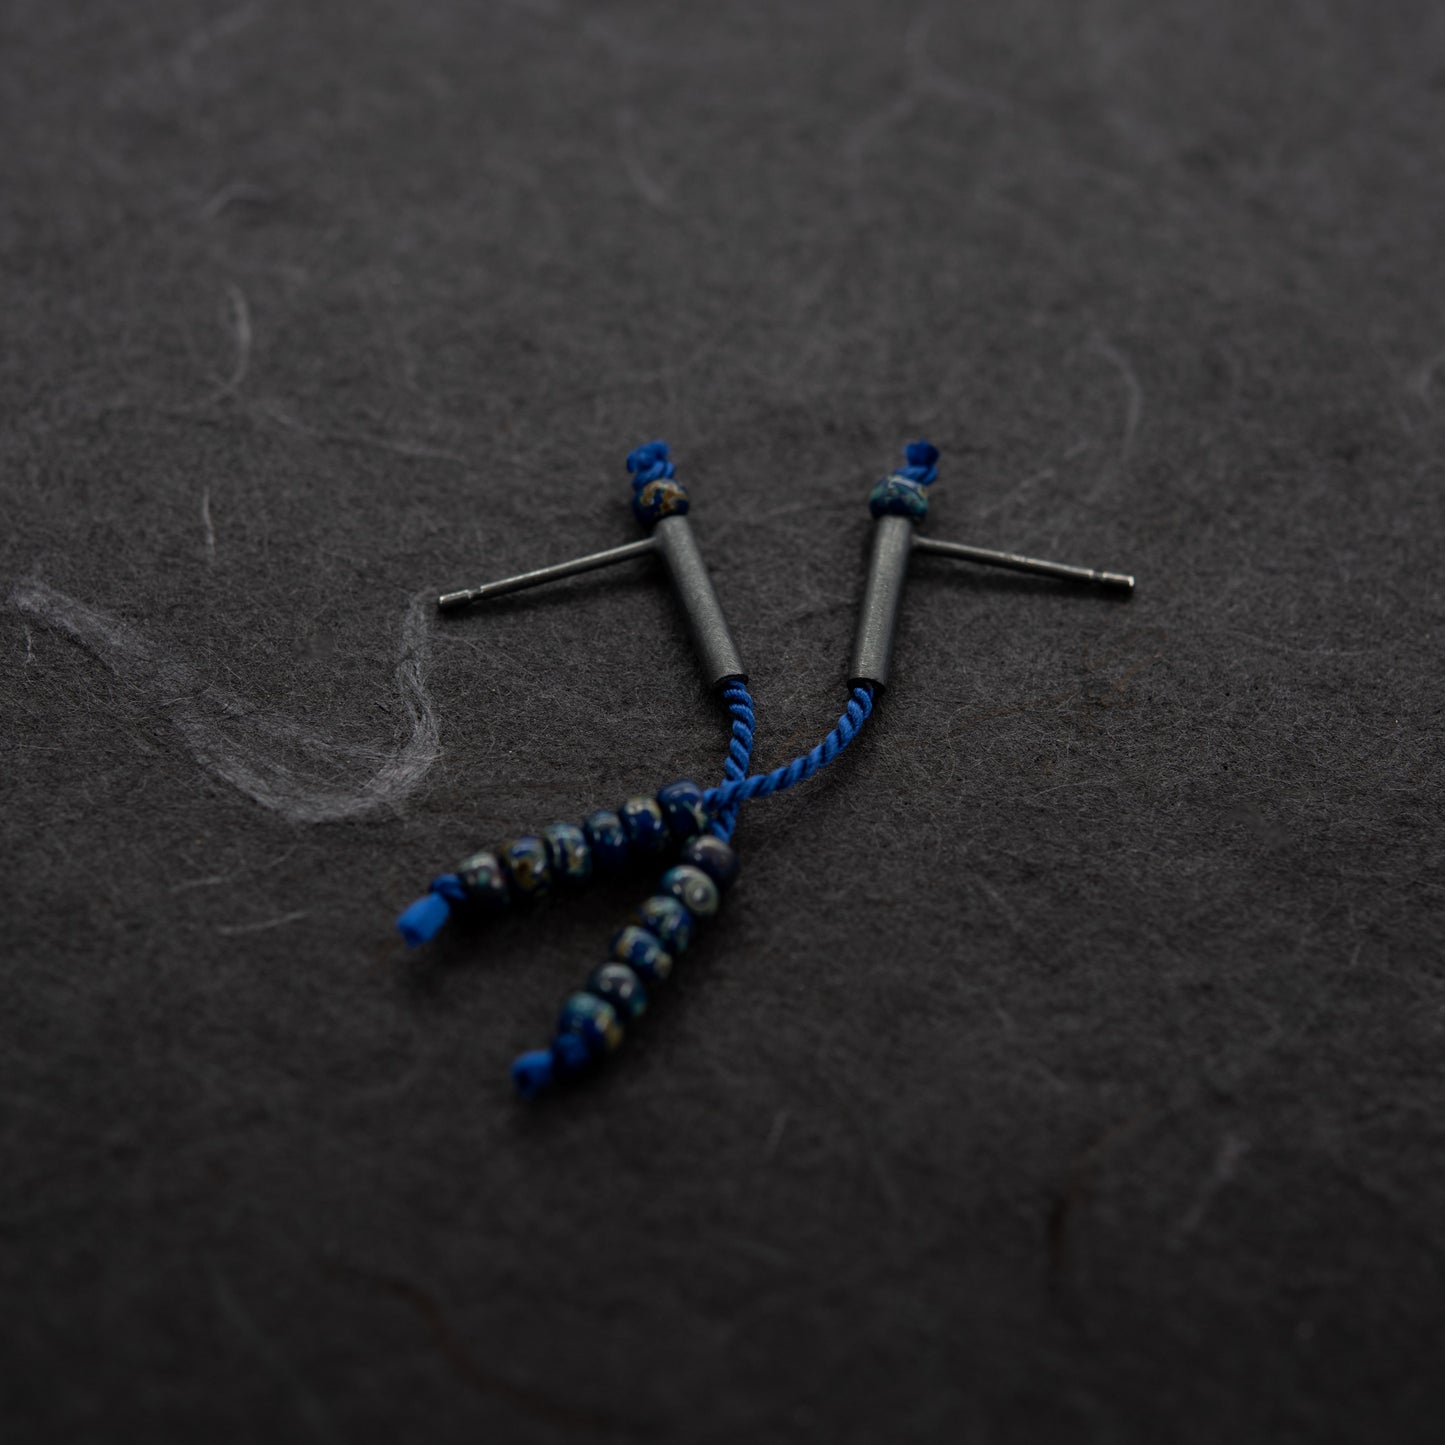 Pair of 38 mm length pendant earrings handmade in oxidized black sterling silver tube with a blue silk cord threaded through the center for hanging Picasso blue Miyuki beads. Designed and made by hand in Paris by A g J c 